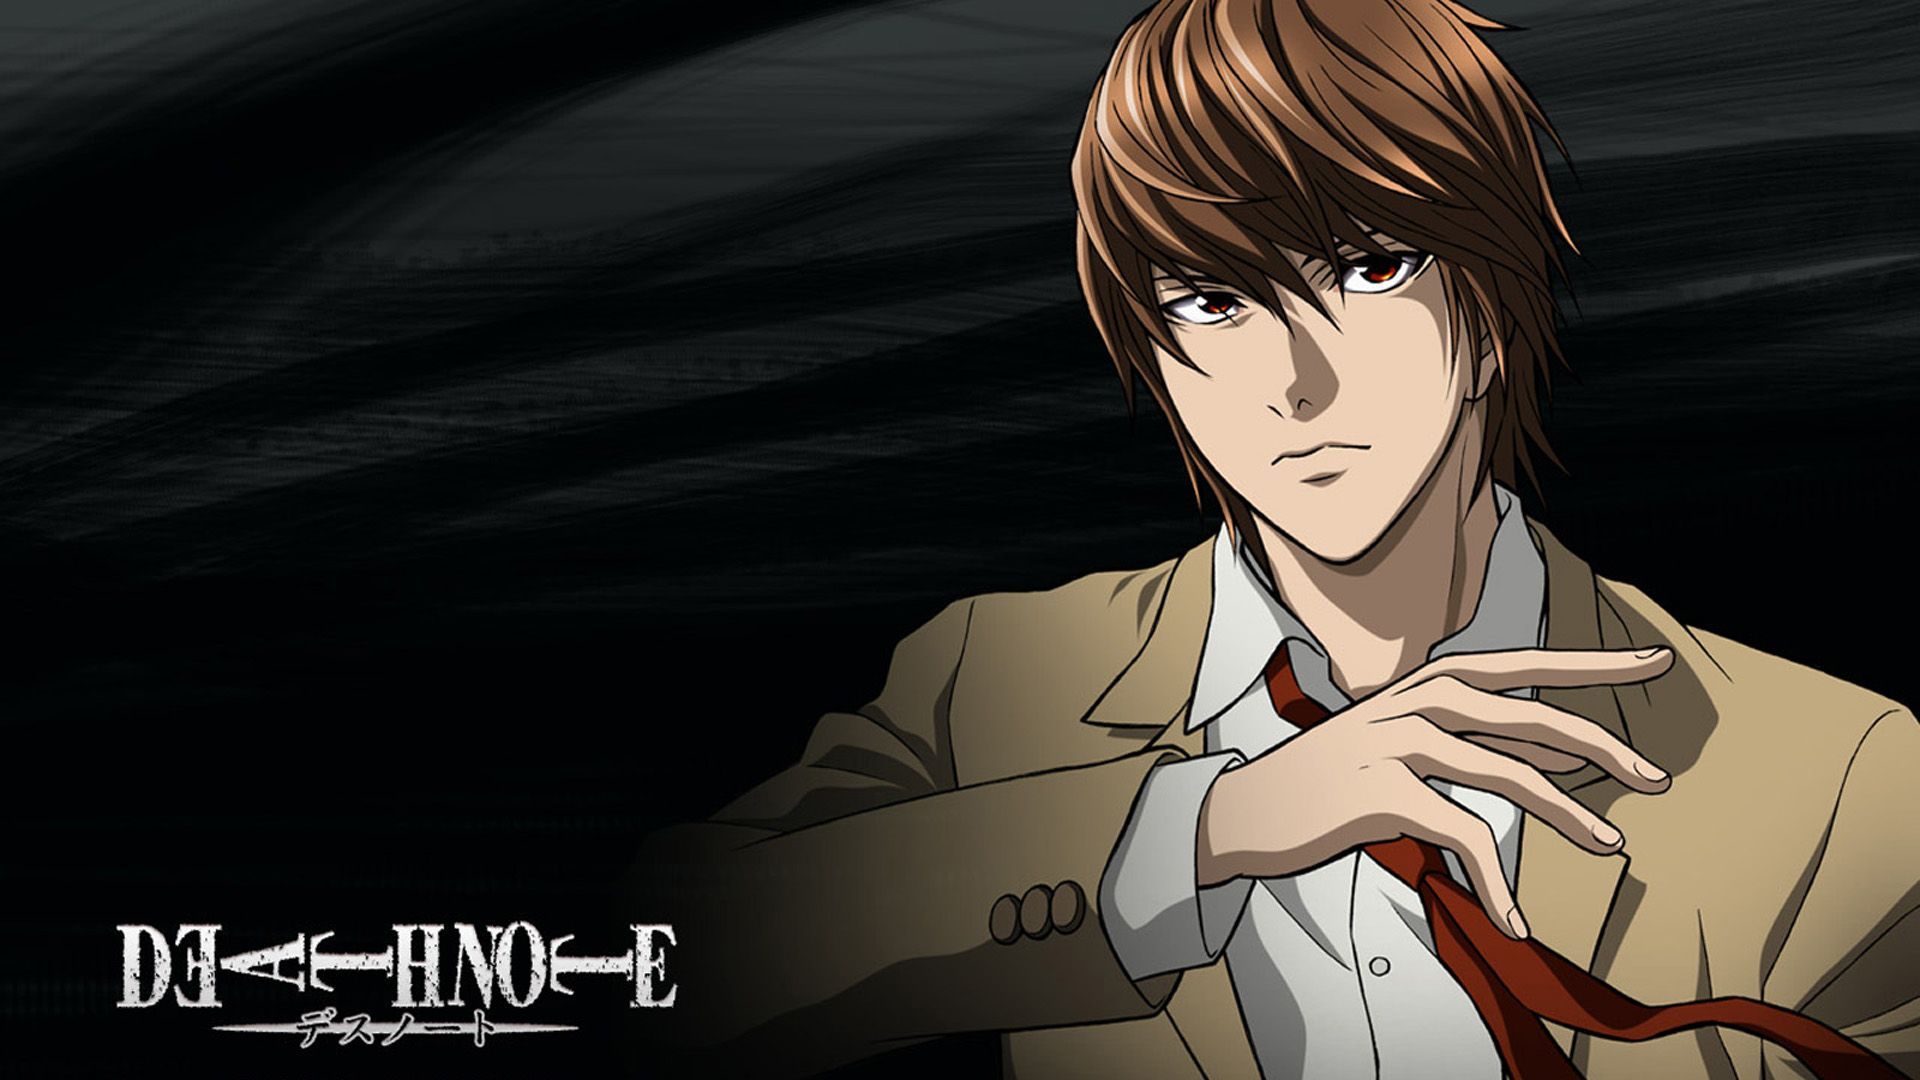 Light Yagami Wallpaper 1920x1080 Wallpapers, 1920x1080 Wallpapers ...